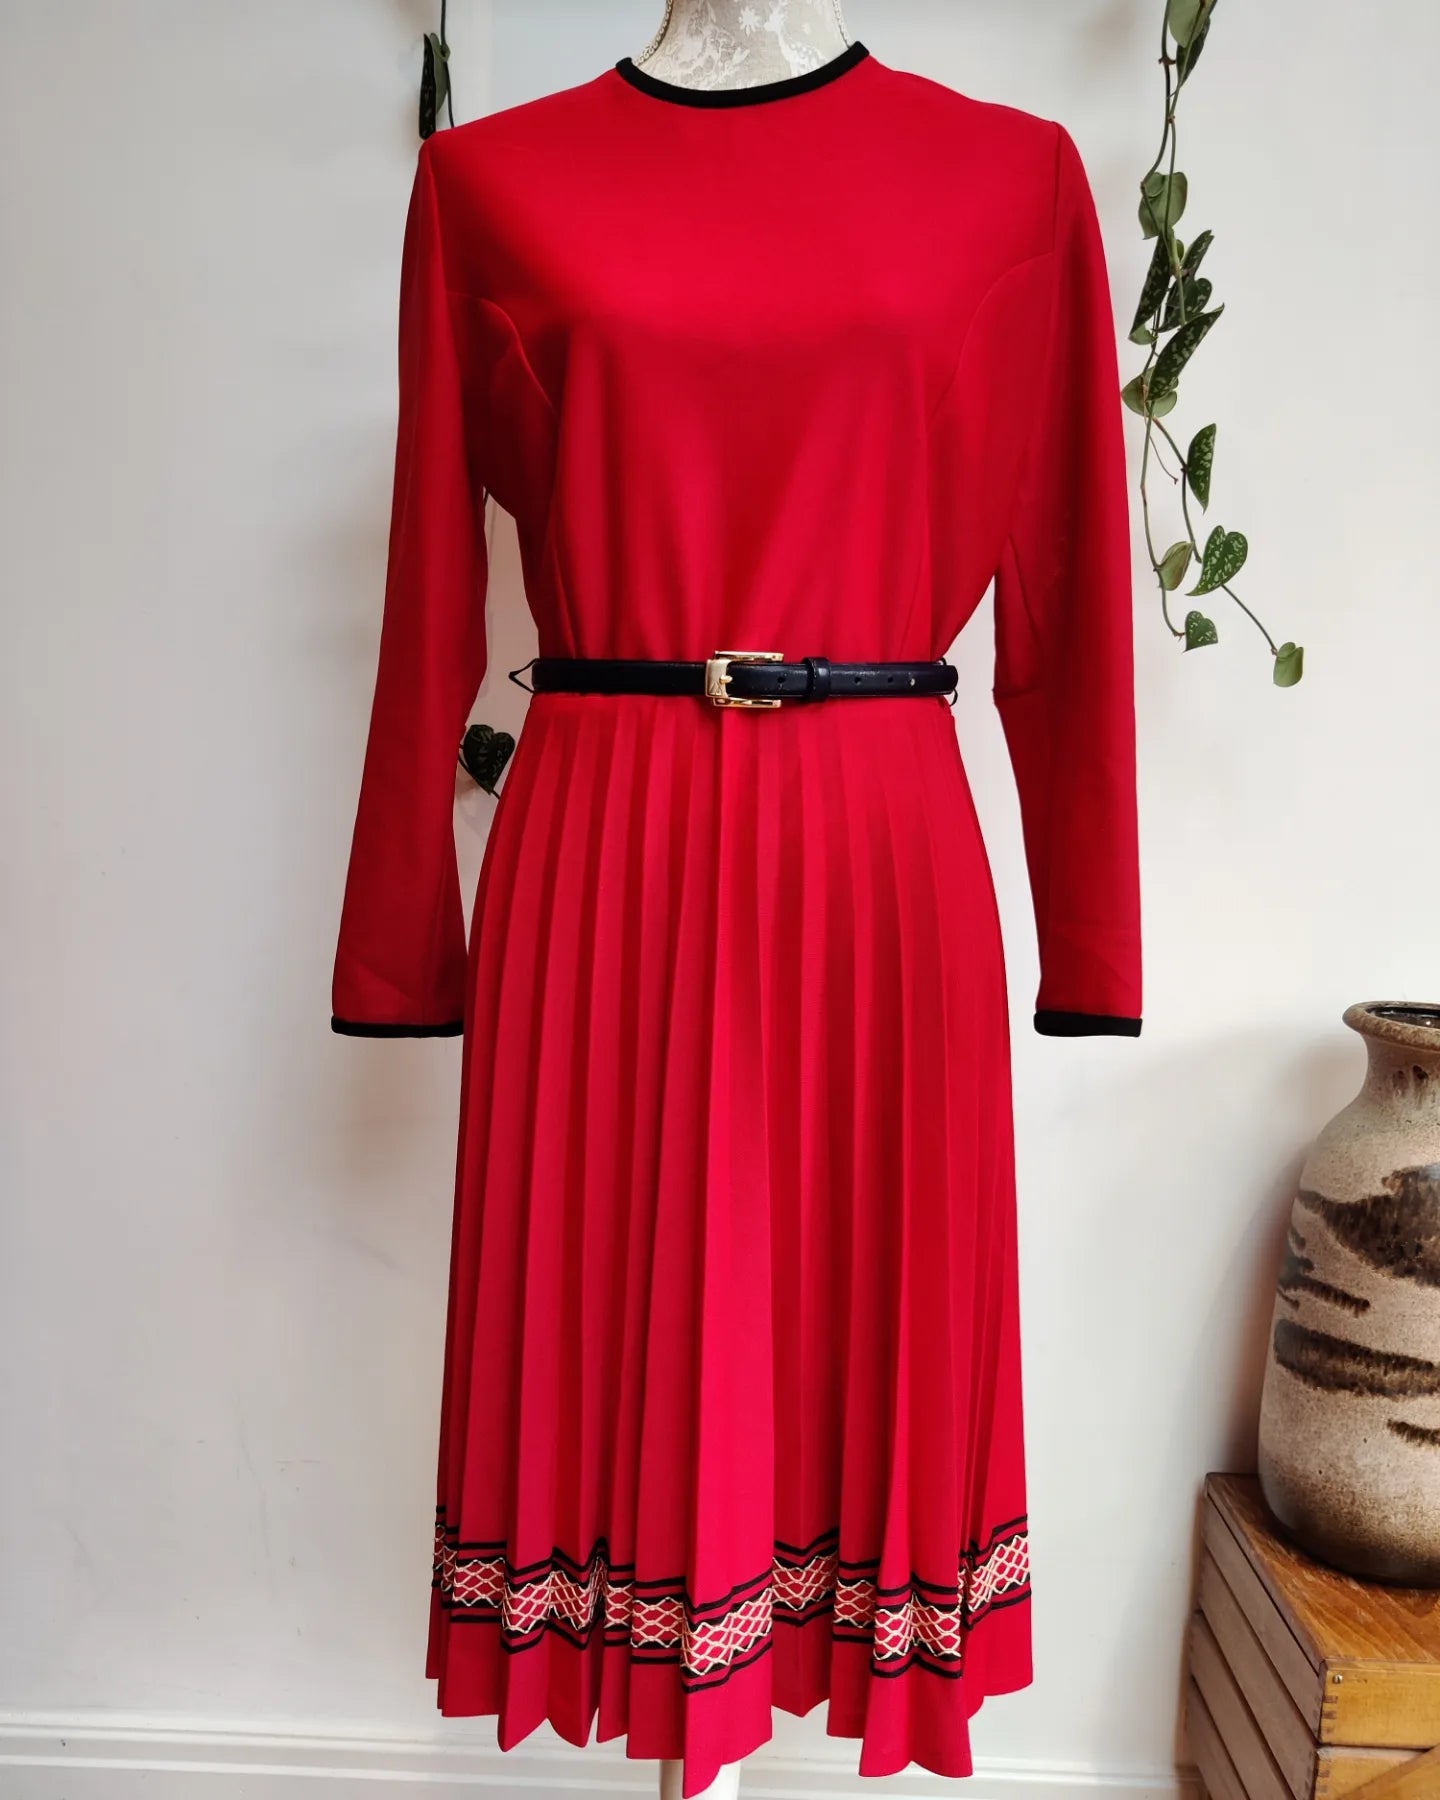 1980s red pleated dress.